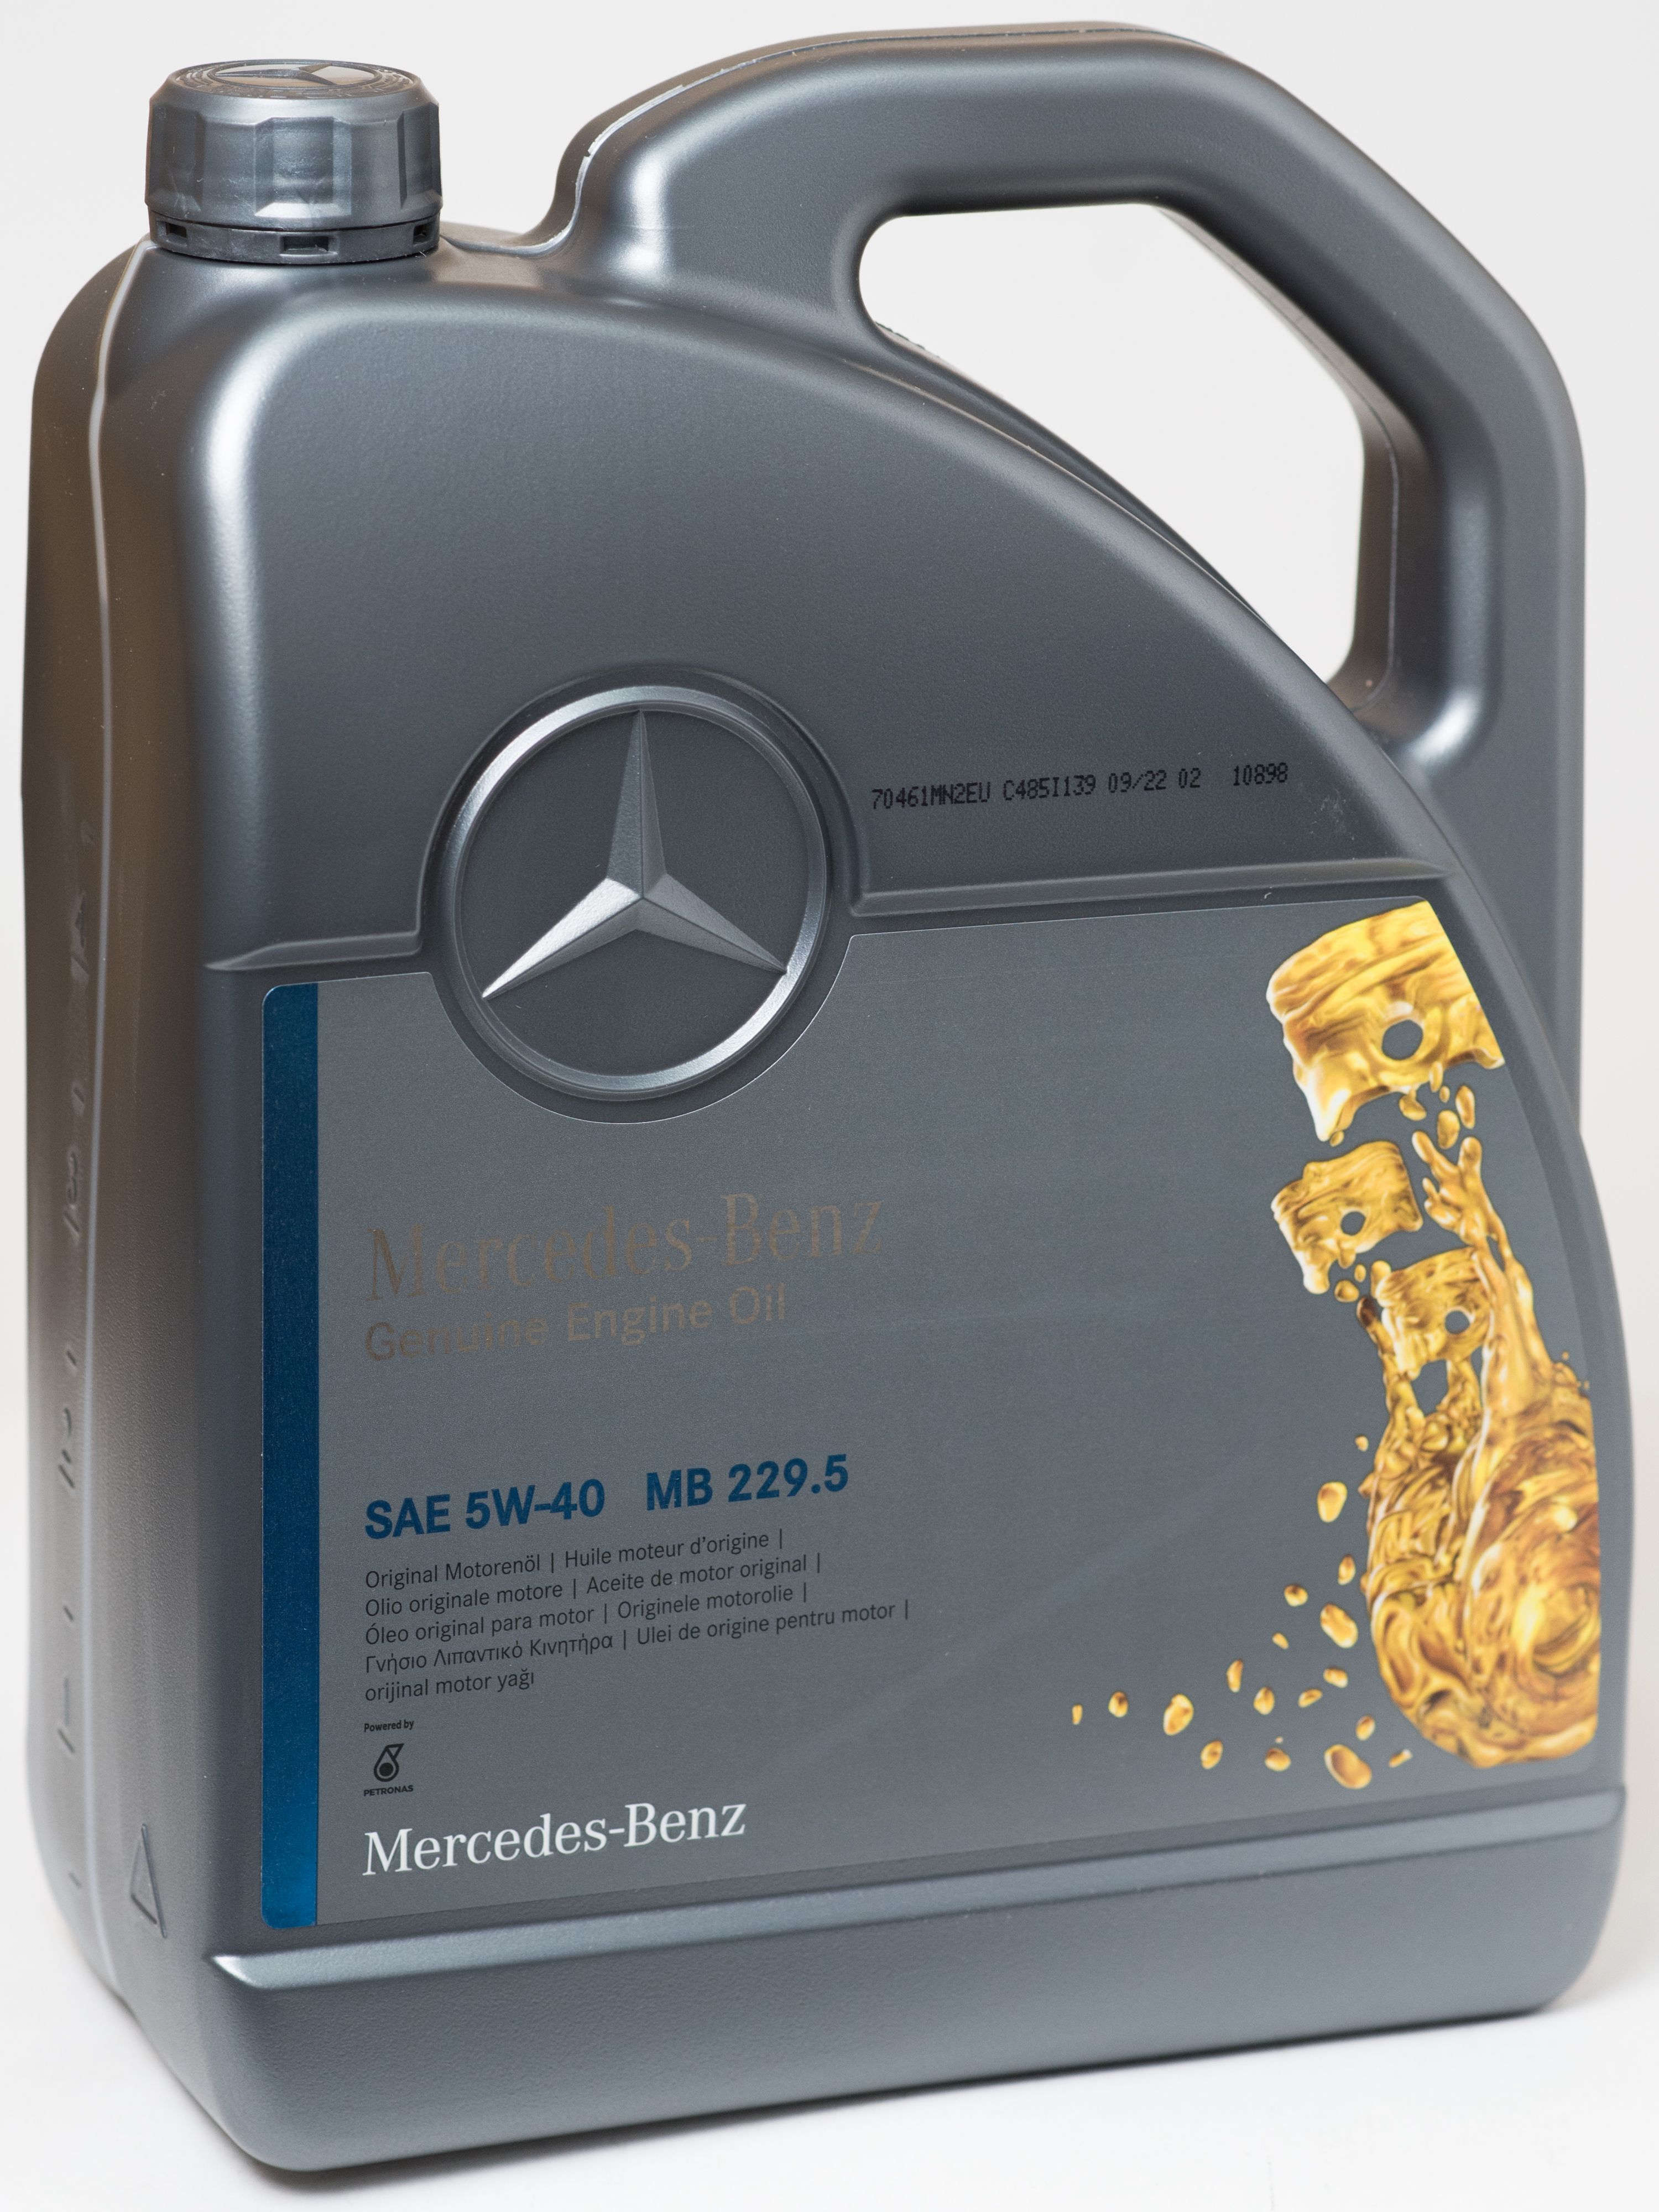 Моторное масло мерседес 5w40. Масло Mercedes 229.5 5w40. Масло МБ 229.5 5w40 производитель. Genuine engine Oil MB 229.71. A0009898301aaa6.